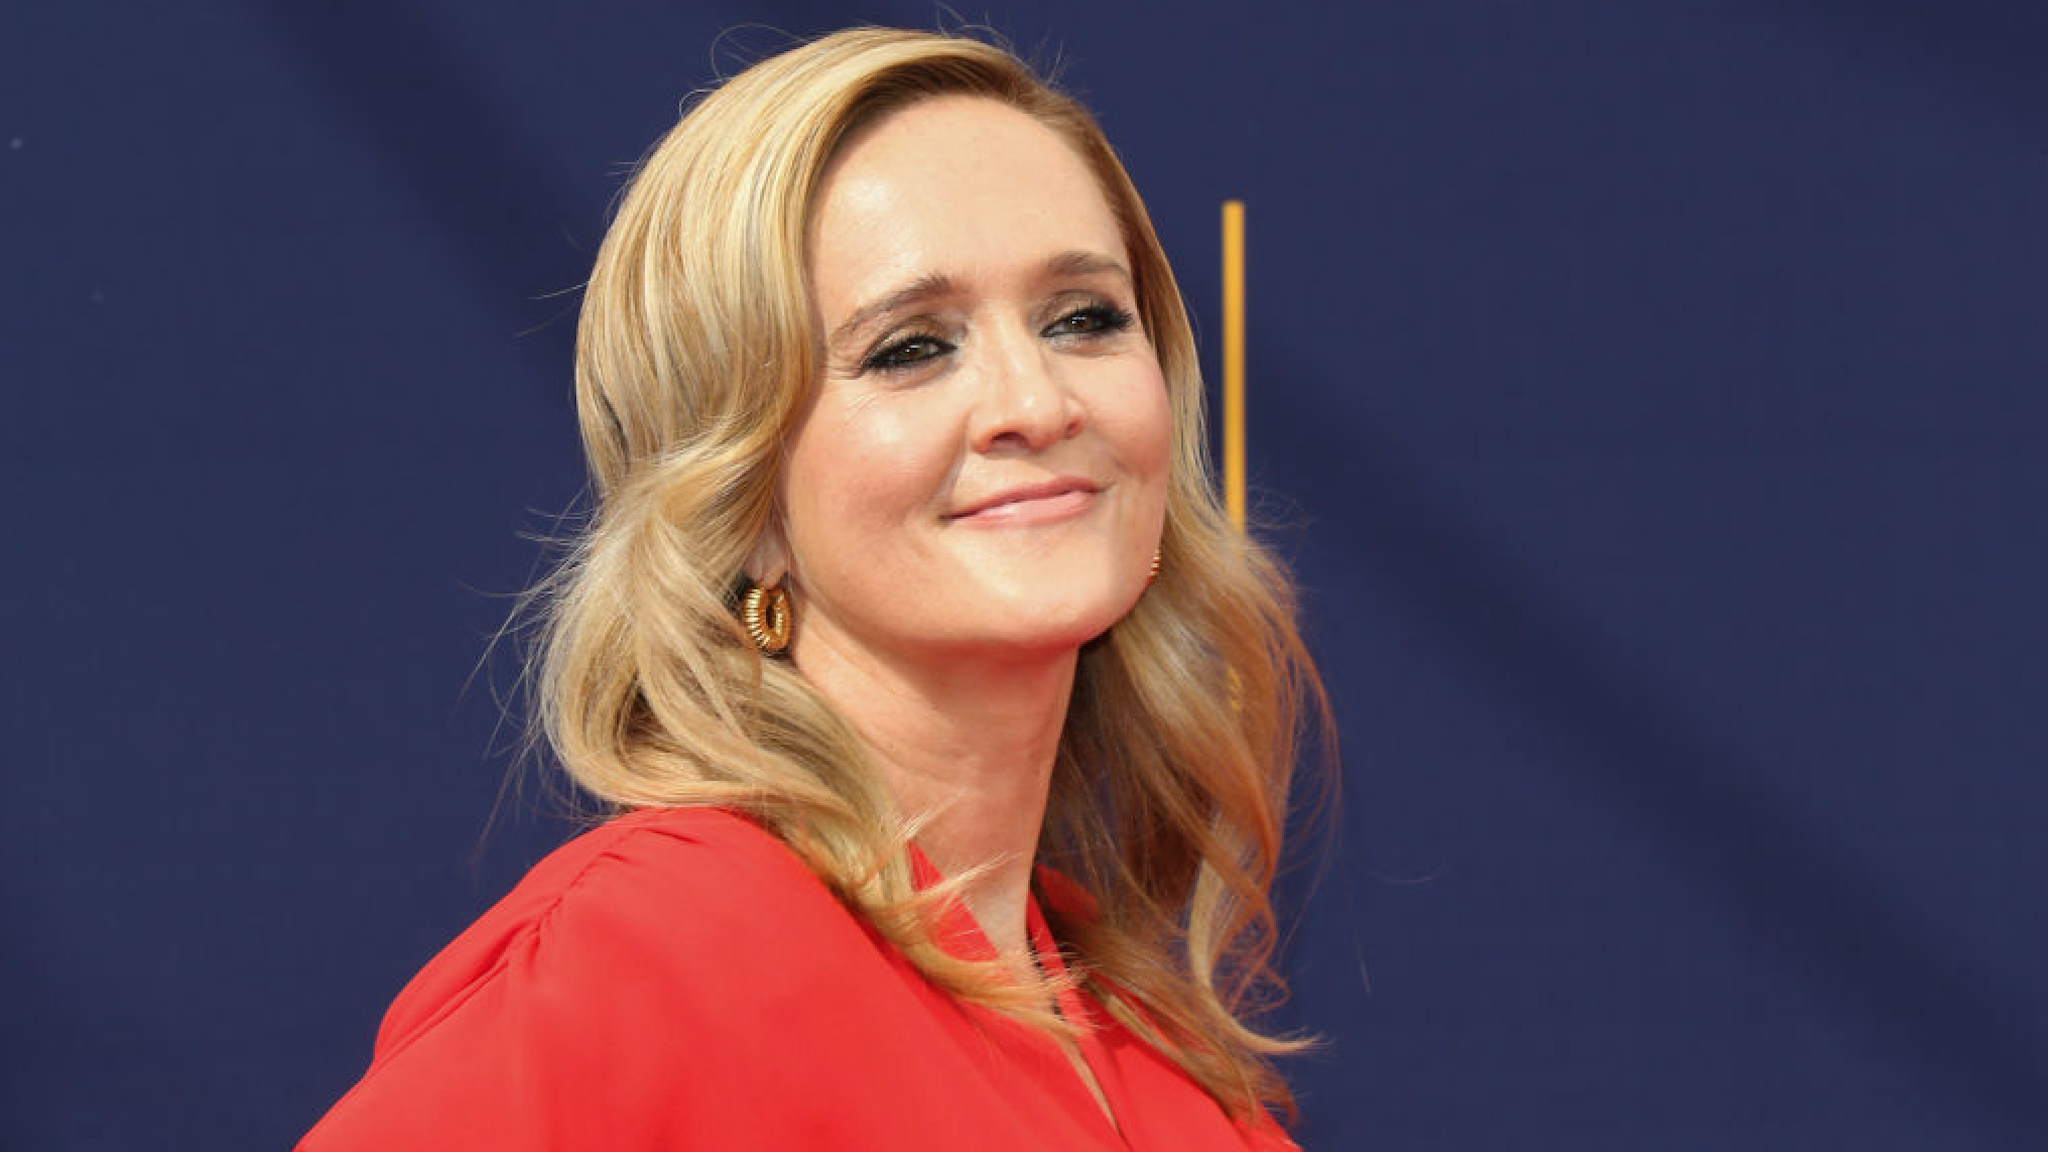 TV Personality / Comedian Samantha Bee attends the 2018 Creative Arts Emmy Awards - Day 2 at the Microsoft Theater on September 9, 2018 in Los Angeles, California.